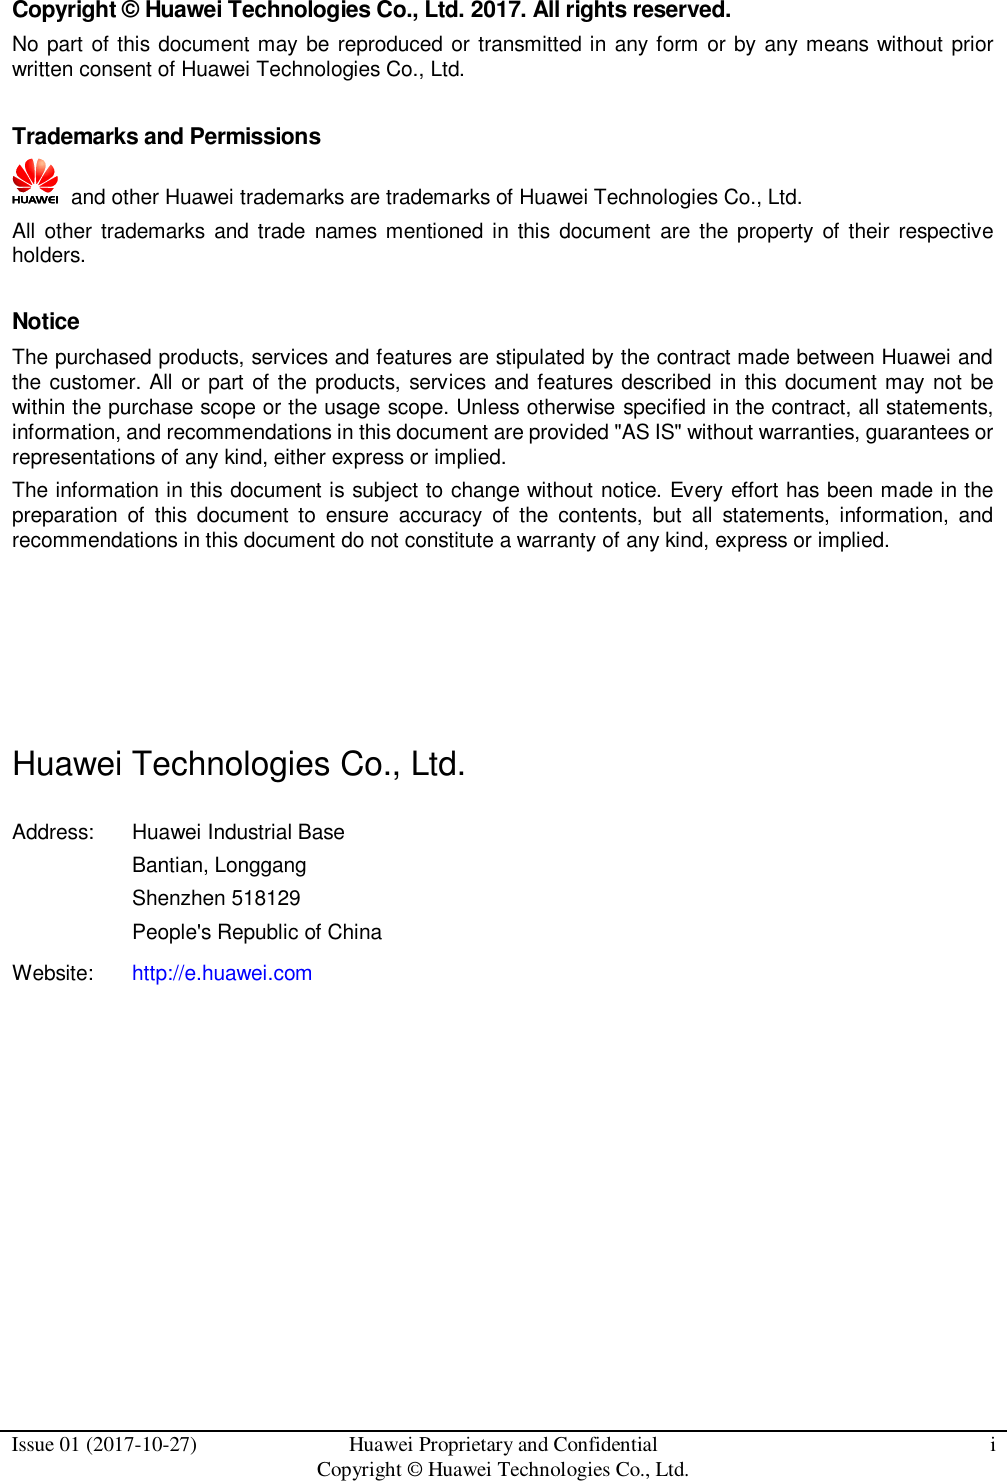  Issue 01 (2017-10-27) Huawei Proprietary and Confidential                                     Copyright © Huawei Technologies Co., Ltd. i  Copyright © Huawei Technologies Co., Ltd. 2017. All rights reserved. No part of this document may be reproduced or transmitted in any form or by any means without prior written consent of Huawei Technologies Co., Ltd.  Trademarks and Permissions   and other Huawei trademarks are trademarks of Huawei Technologies Co., Ltd. All  other trademarks and trade names mentioned in this document  are  the  property  of their  respective holders.  Notice The purchased products, services and features are stipulated by the contract made between Huawei and the customer. All or part of the products, services and features described in this document may not be within the purchase scope or the usage scope. Unless otherwise specified in the contract, all statements, information, and recommendations in this document are provided &quot;AS IS&quot; without warranties, guarantees or representations of any kind, either express or implied. The information in this document is subject to change without notice. Every effort has been made in the preparation  of  this  document  to  ensure  accuracy  of  the  contents,  but  all  statements,  information,  and recommendations in this document do not constitute a warranty of any kind, express or implied.     Huawei Technologies Co., Ltd. Address: Huawei Industrial Base Bantian, Longgang Shenzhen 518129 People&apos;s Republic of China Website: http://e.huawei.com        